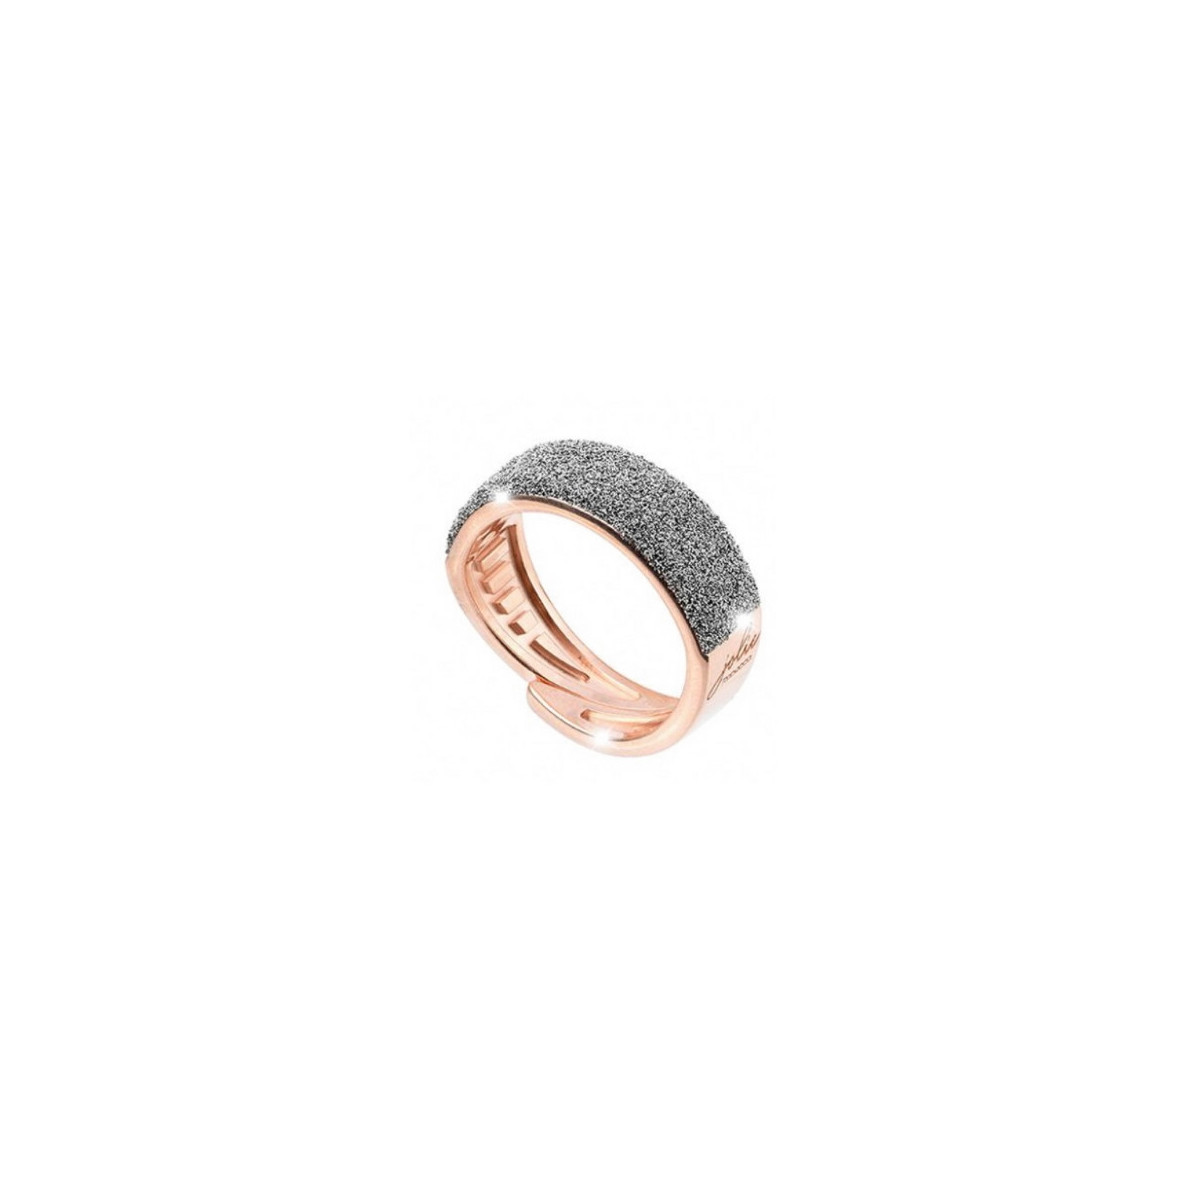 ROSE SILVER AND DUSTED DIAMOND RING